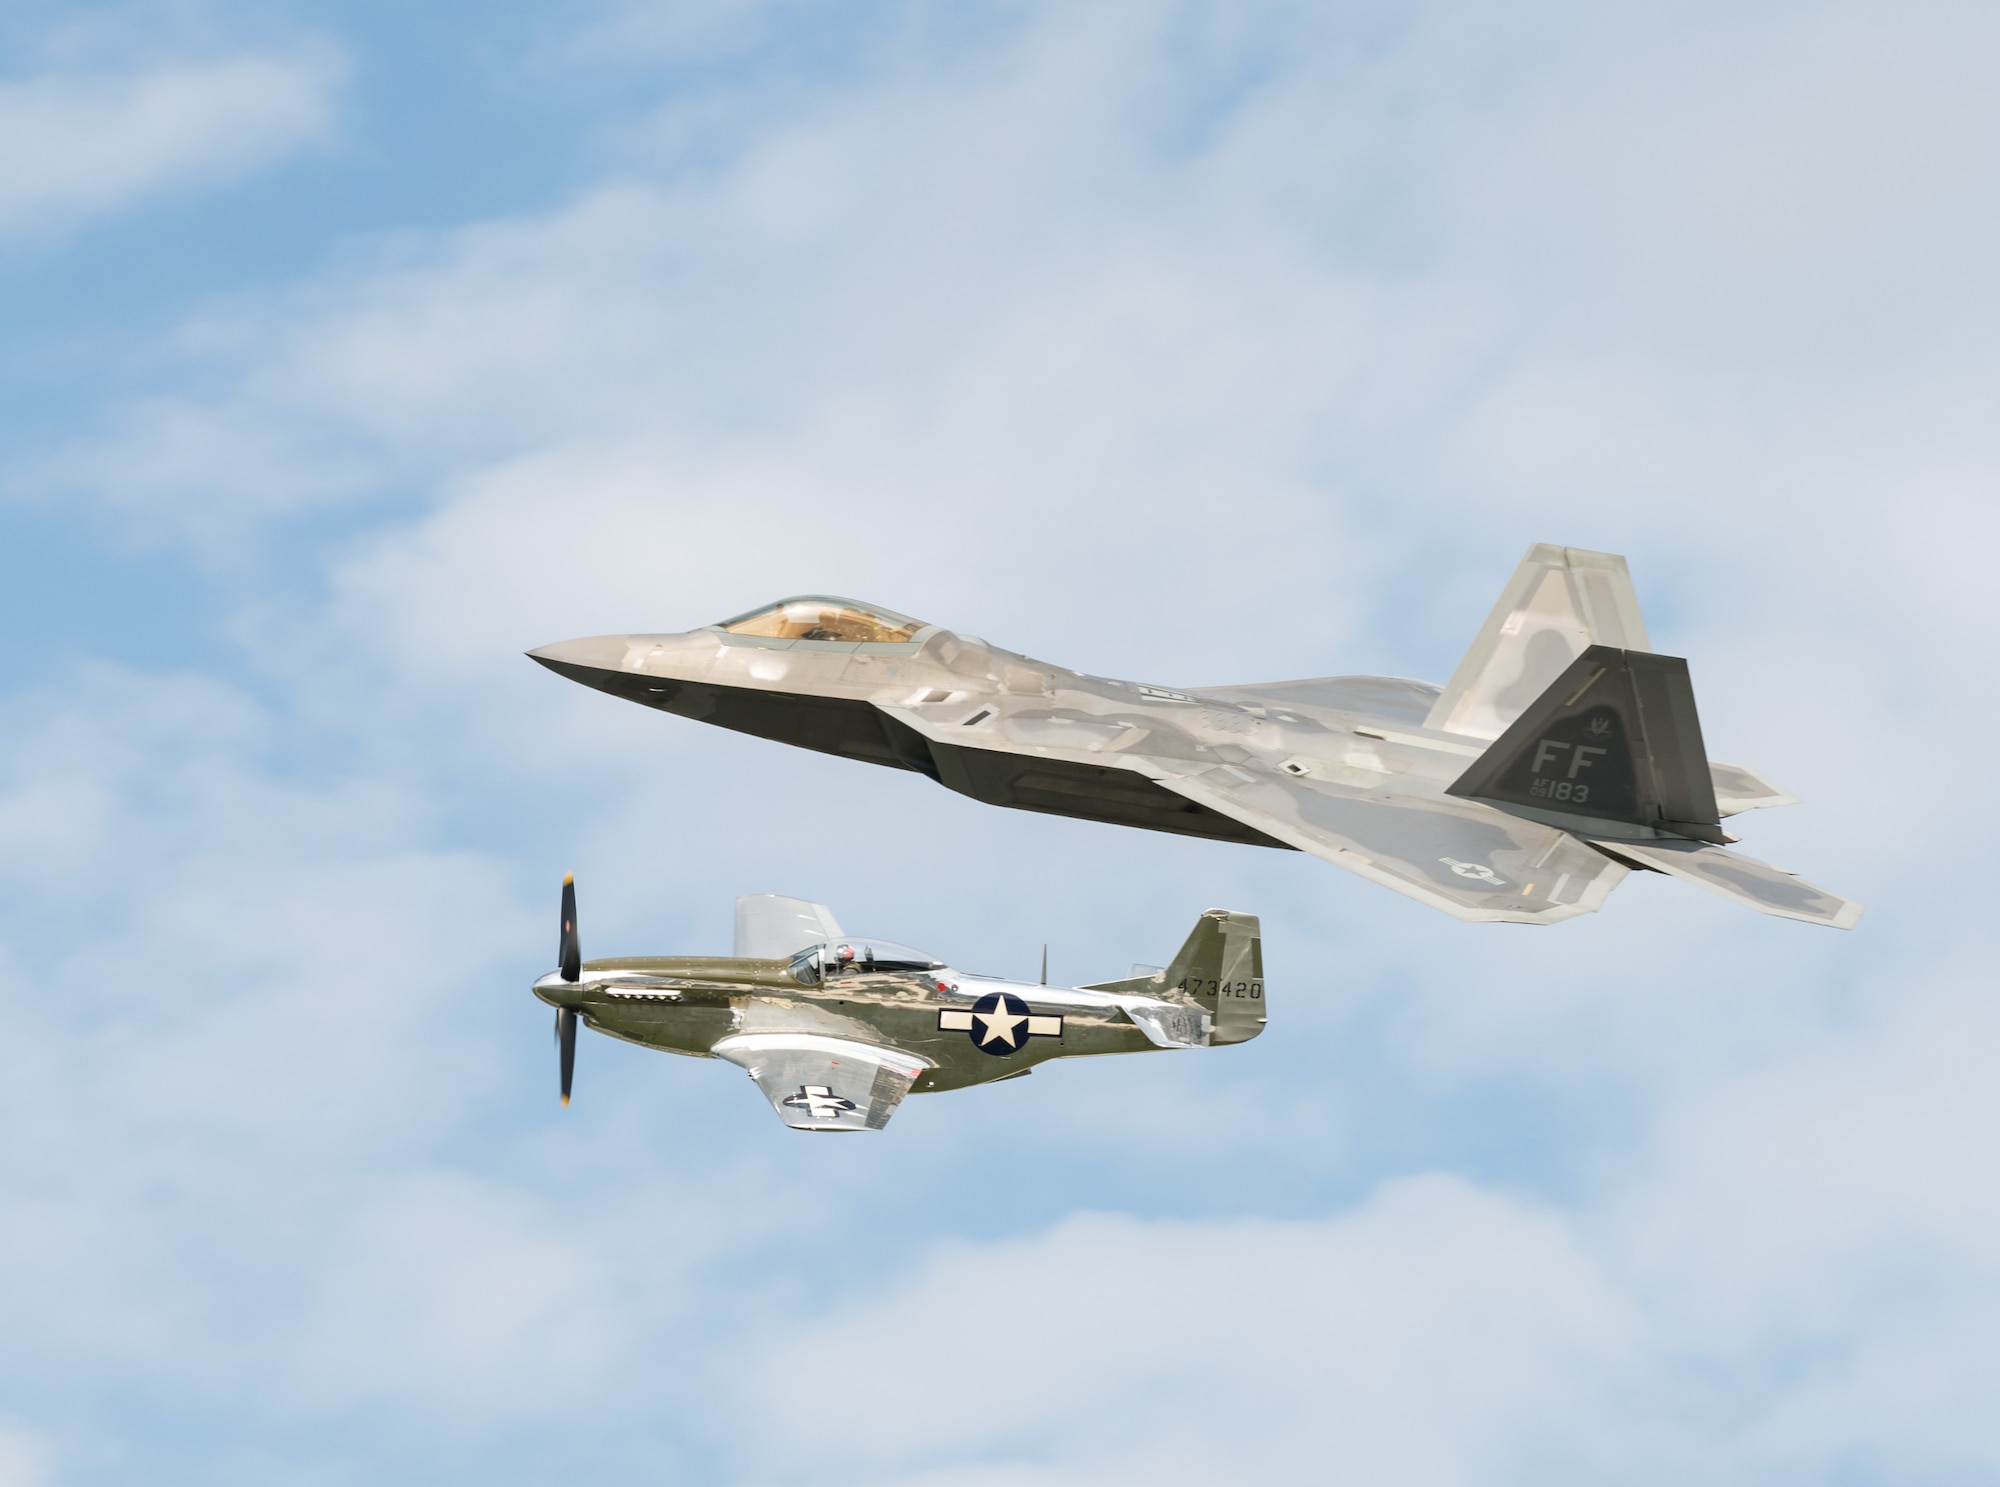 An F-22 Raptor and P-51 Mustang fly side-by-side during the heritage flight Sept. 14, 2019, at Dover Air Force Base, Del. This year's Thunder Over Dover Air Show featured more than 20 aircraft static displays, as well as numerous aerial demonstrations. (U.S. Air Force photo by Roland Balik)